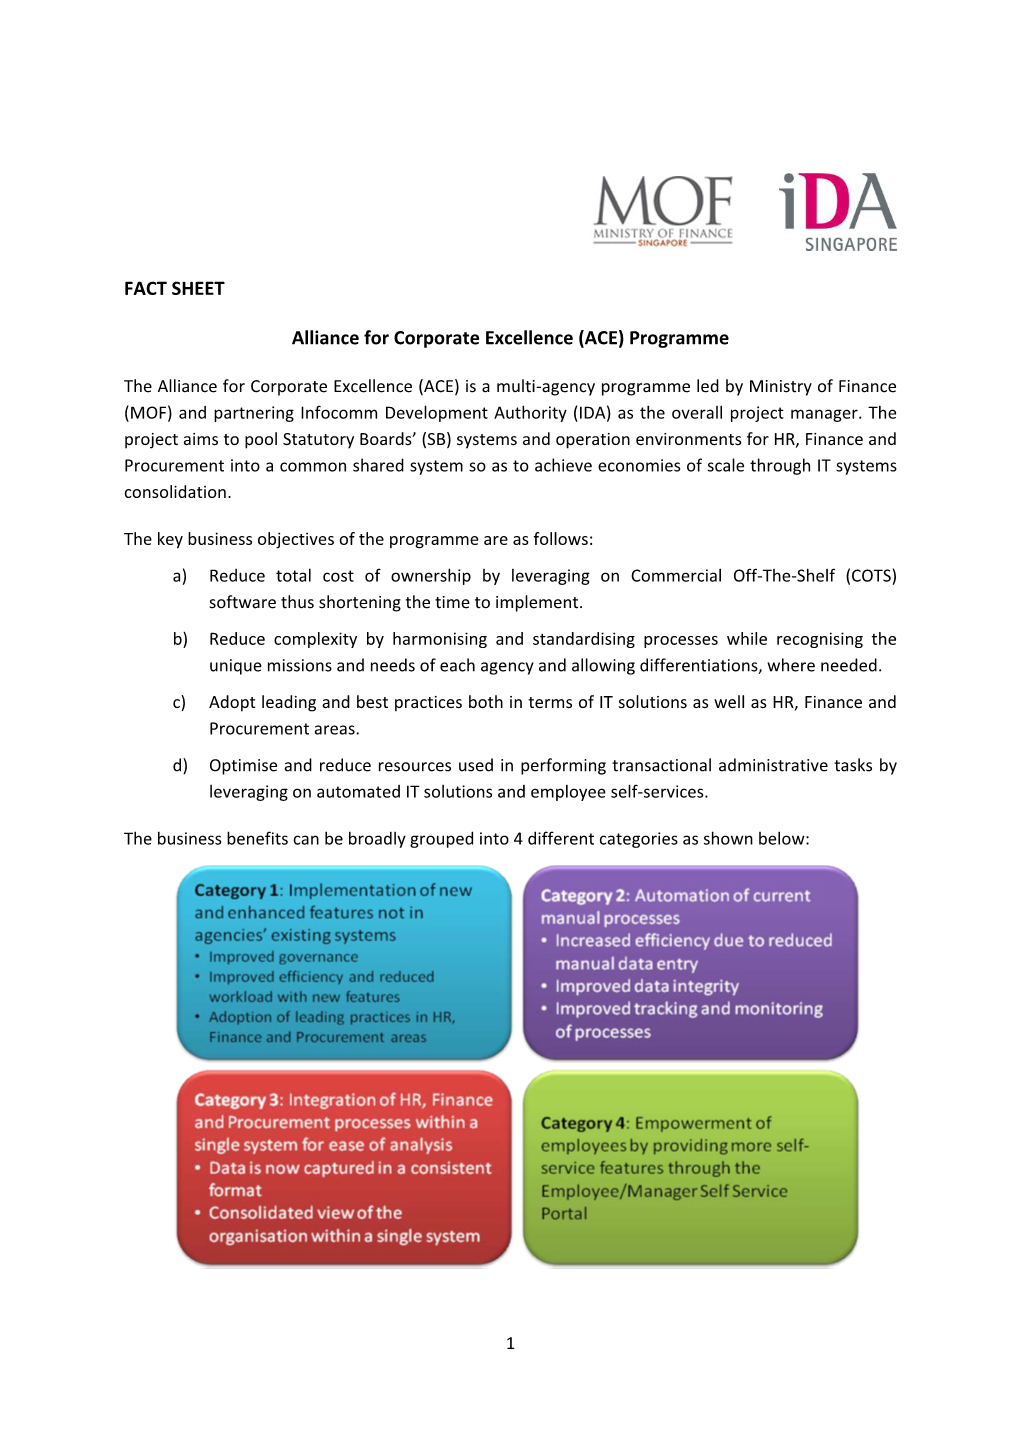 FACT SHEET Alliance for Corporate Excellence (ACE) Programme